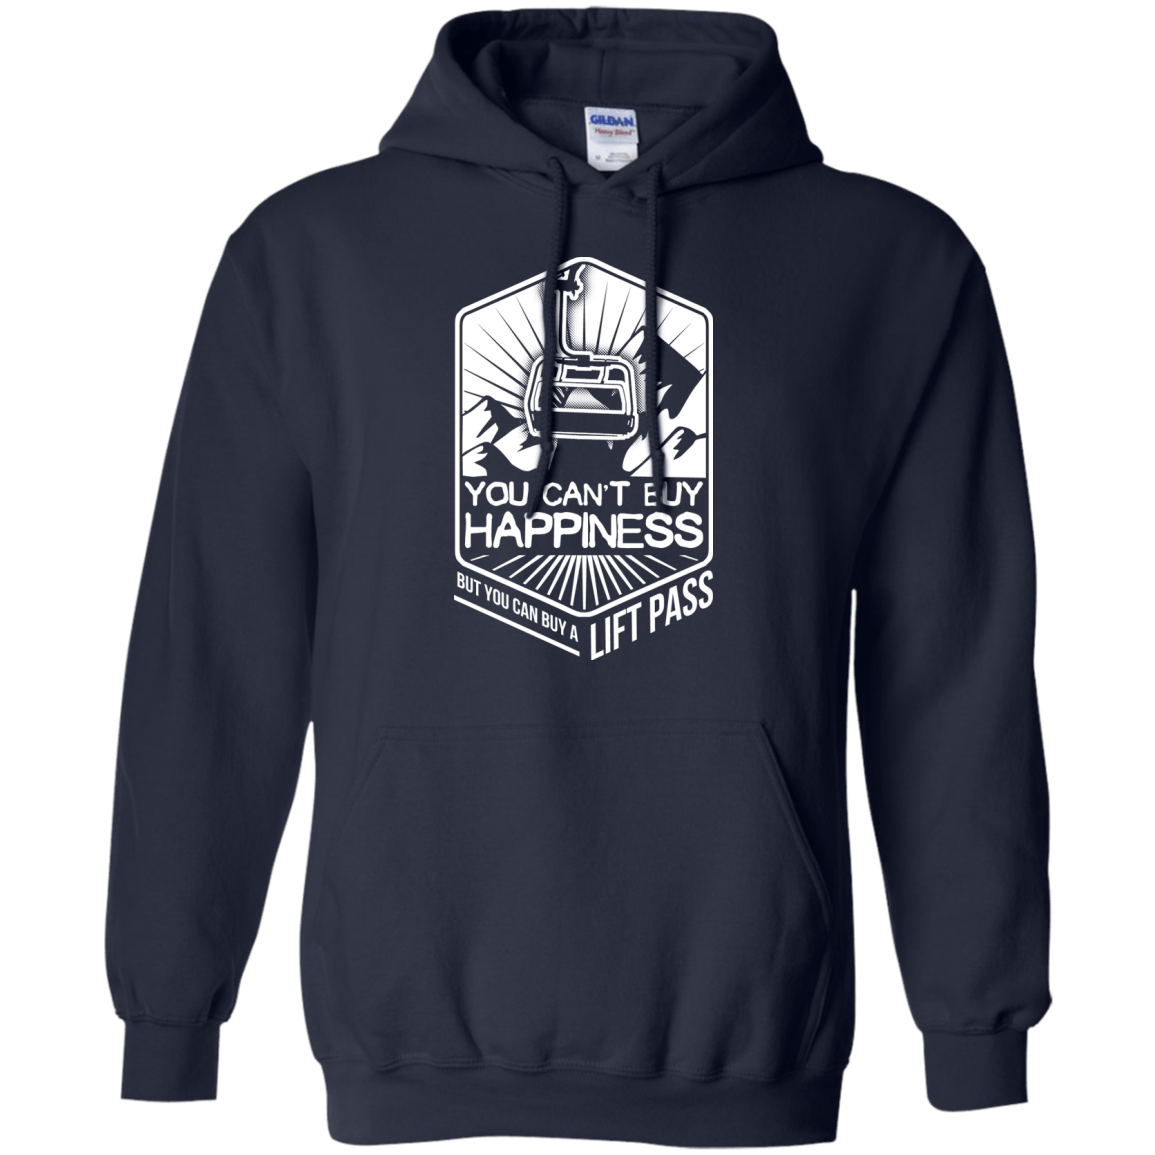 You Can't Buy Happiness But You Can Buy A Lift Pass Hoodies - Powderaddicts